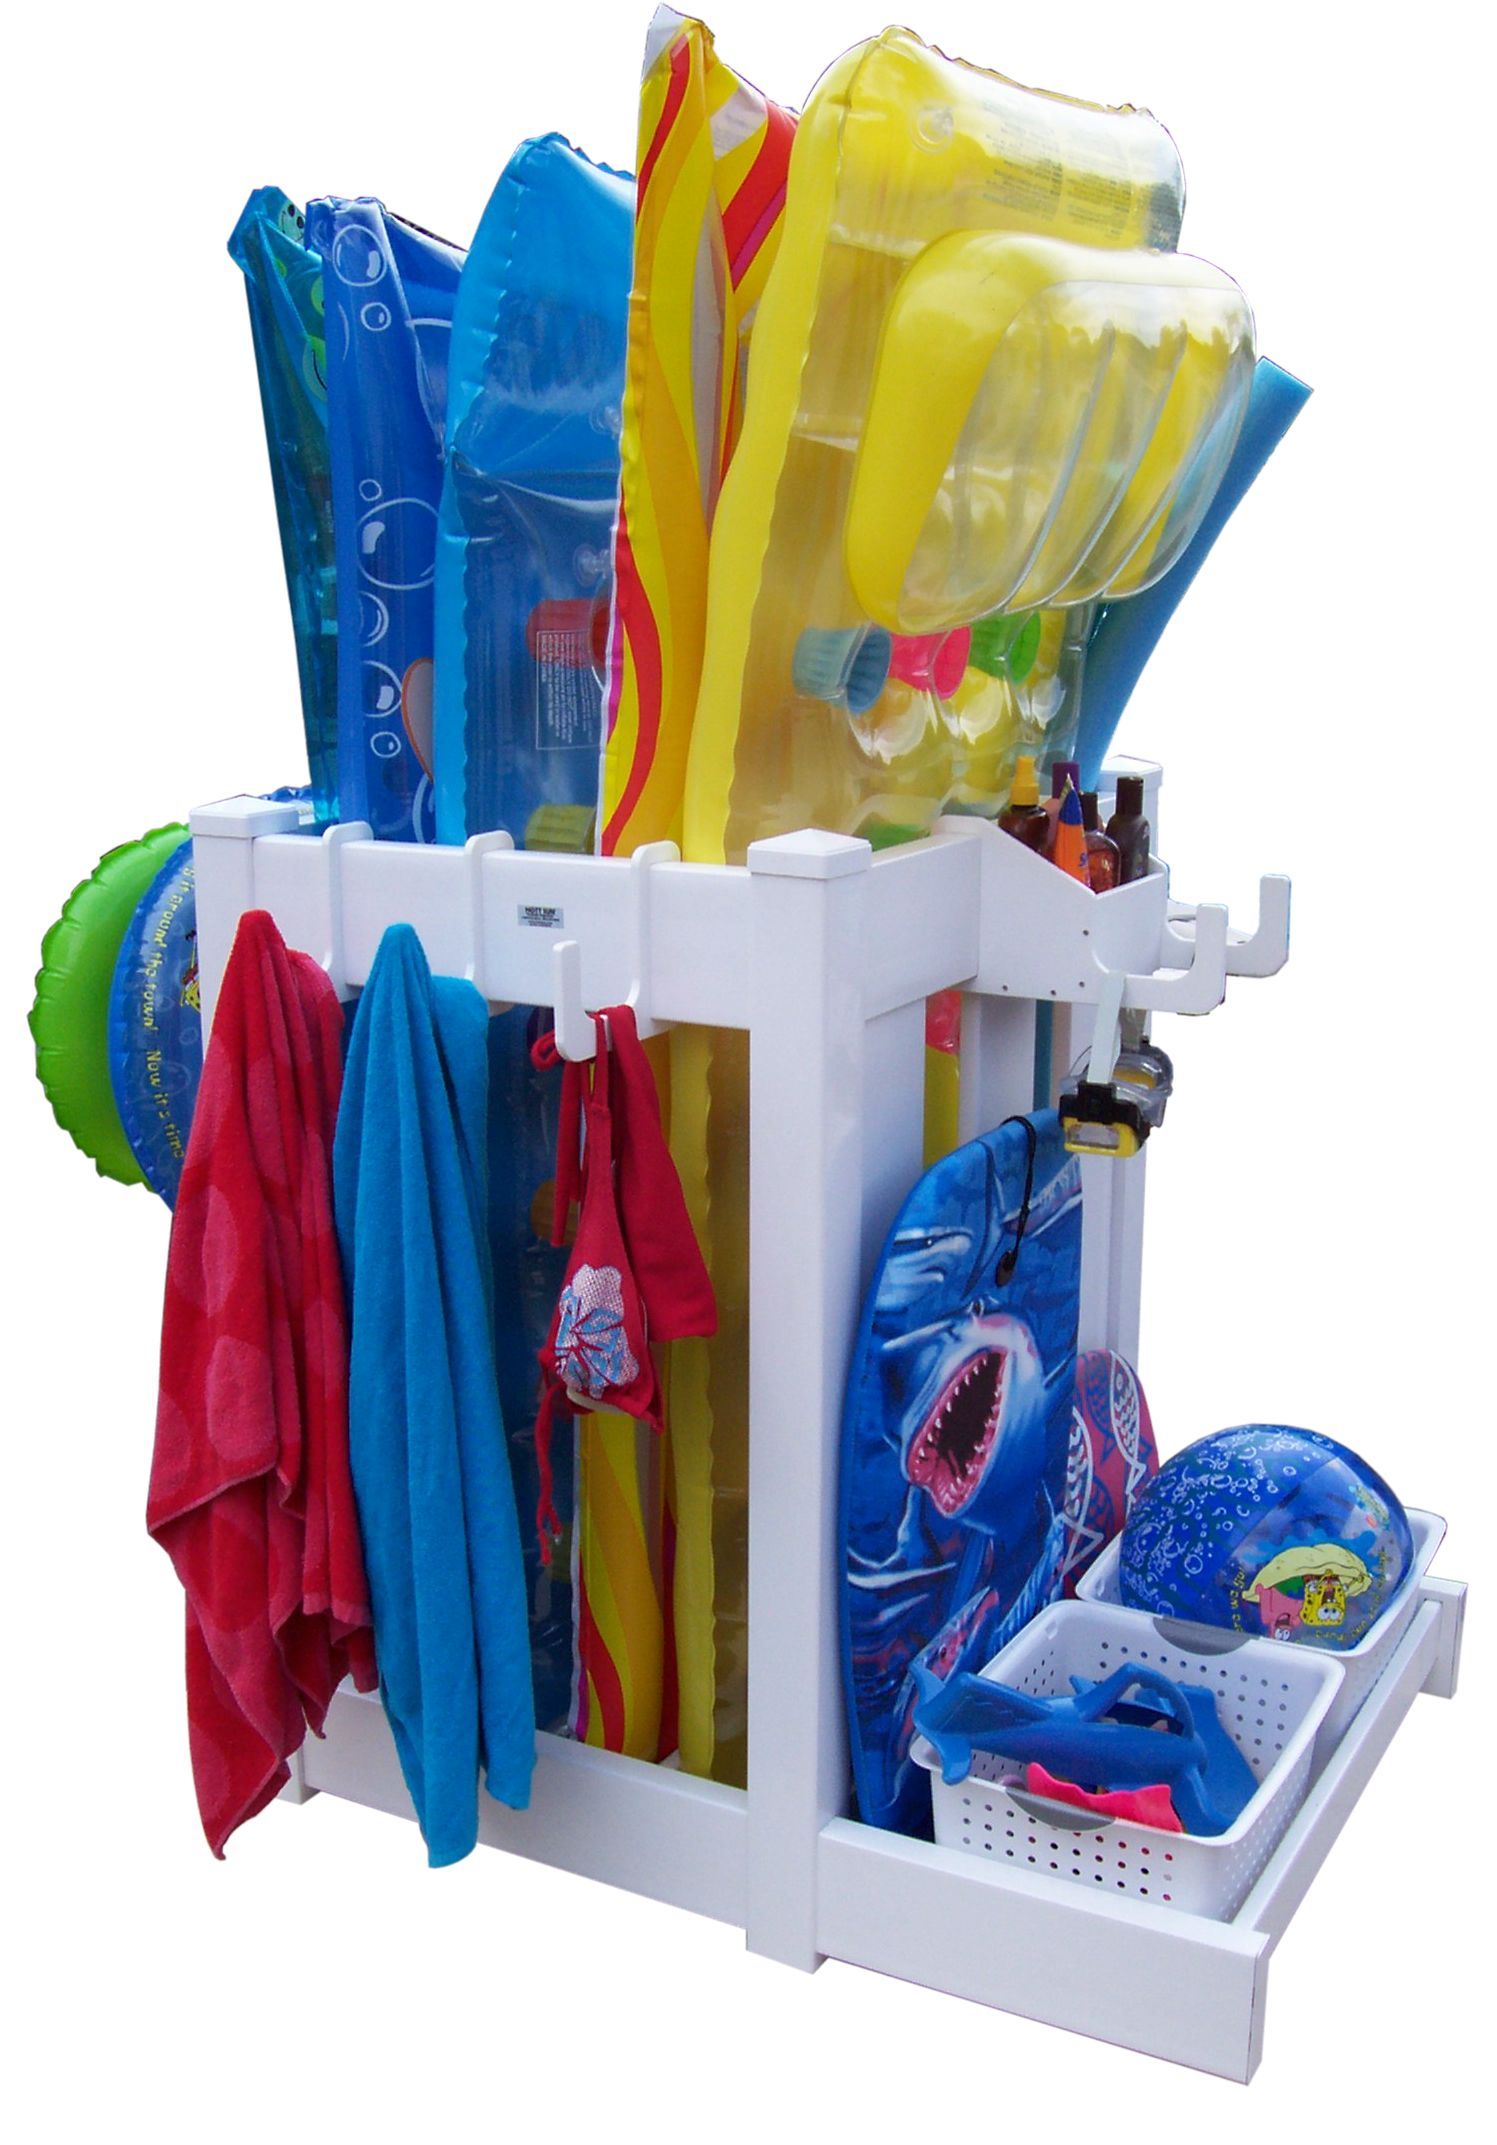 organize your pool floats (